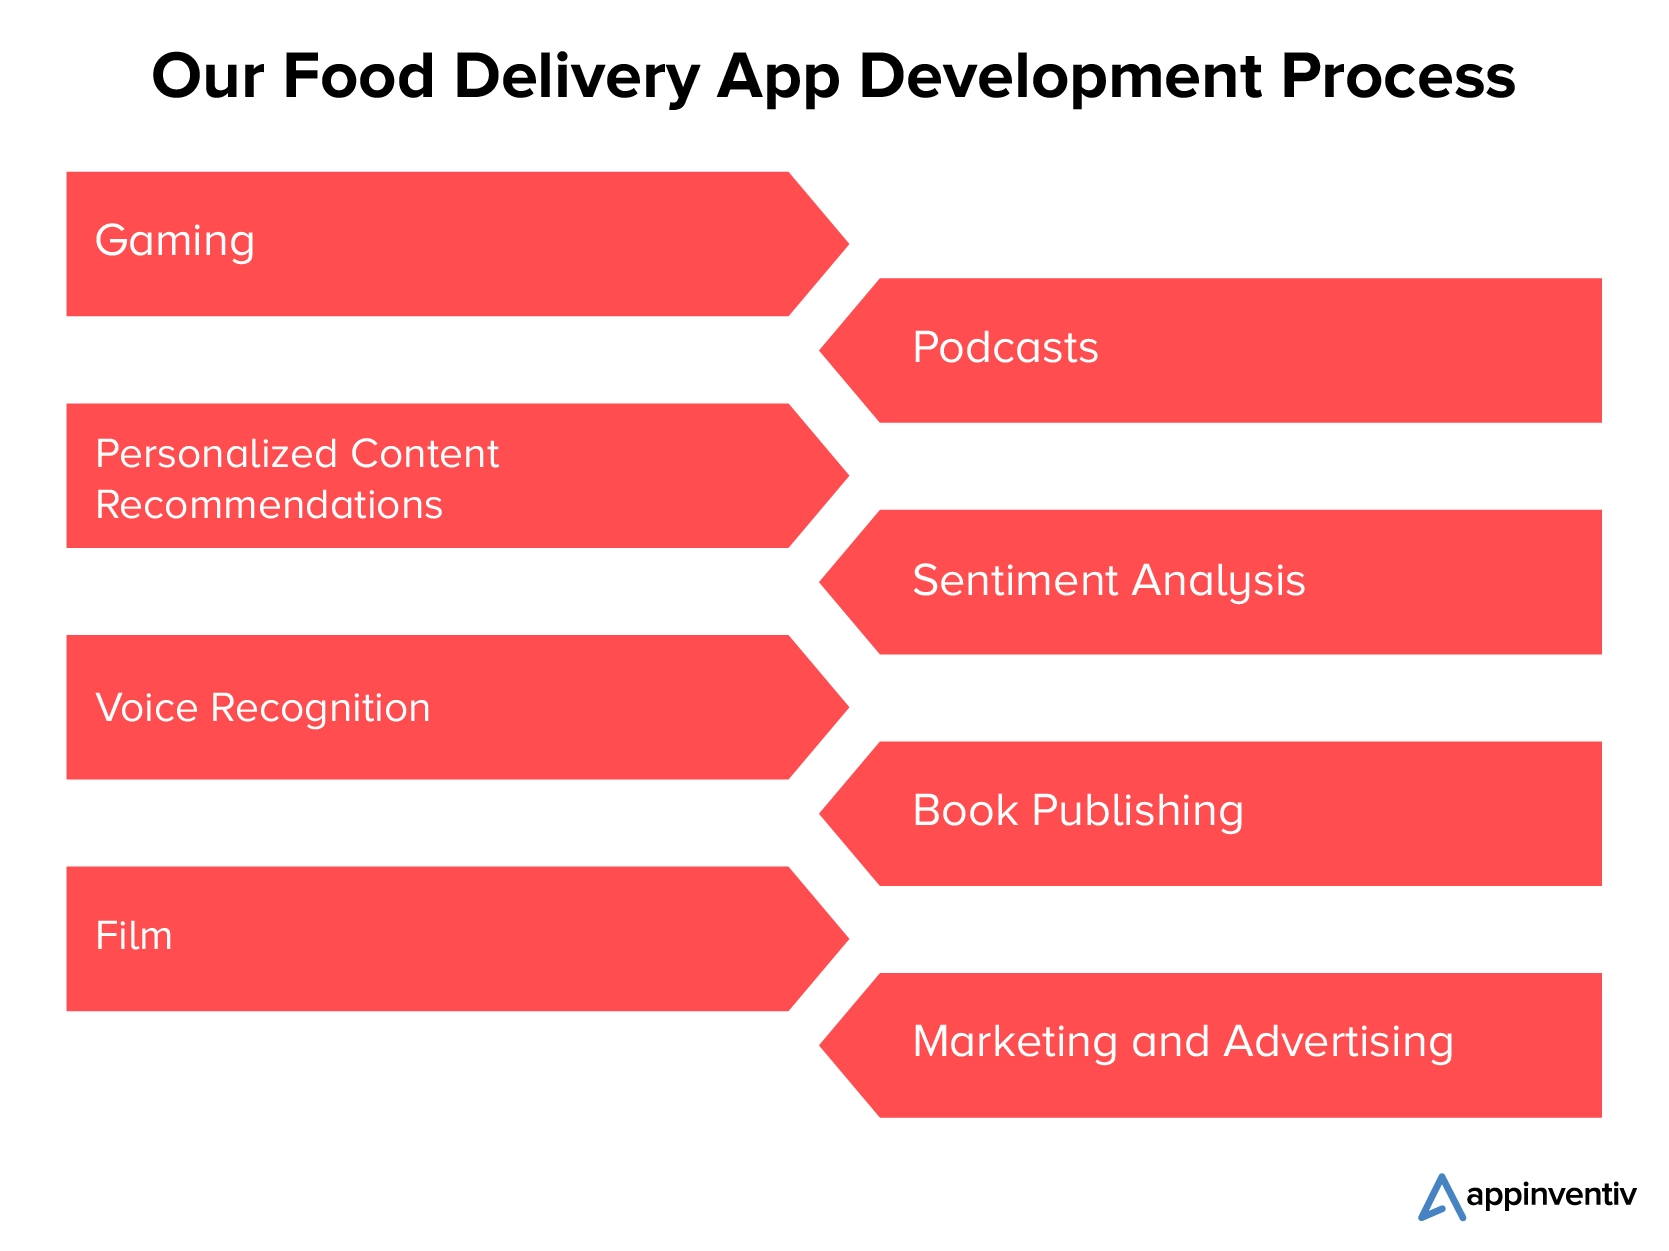 Our food delivery app development process